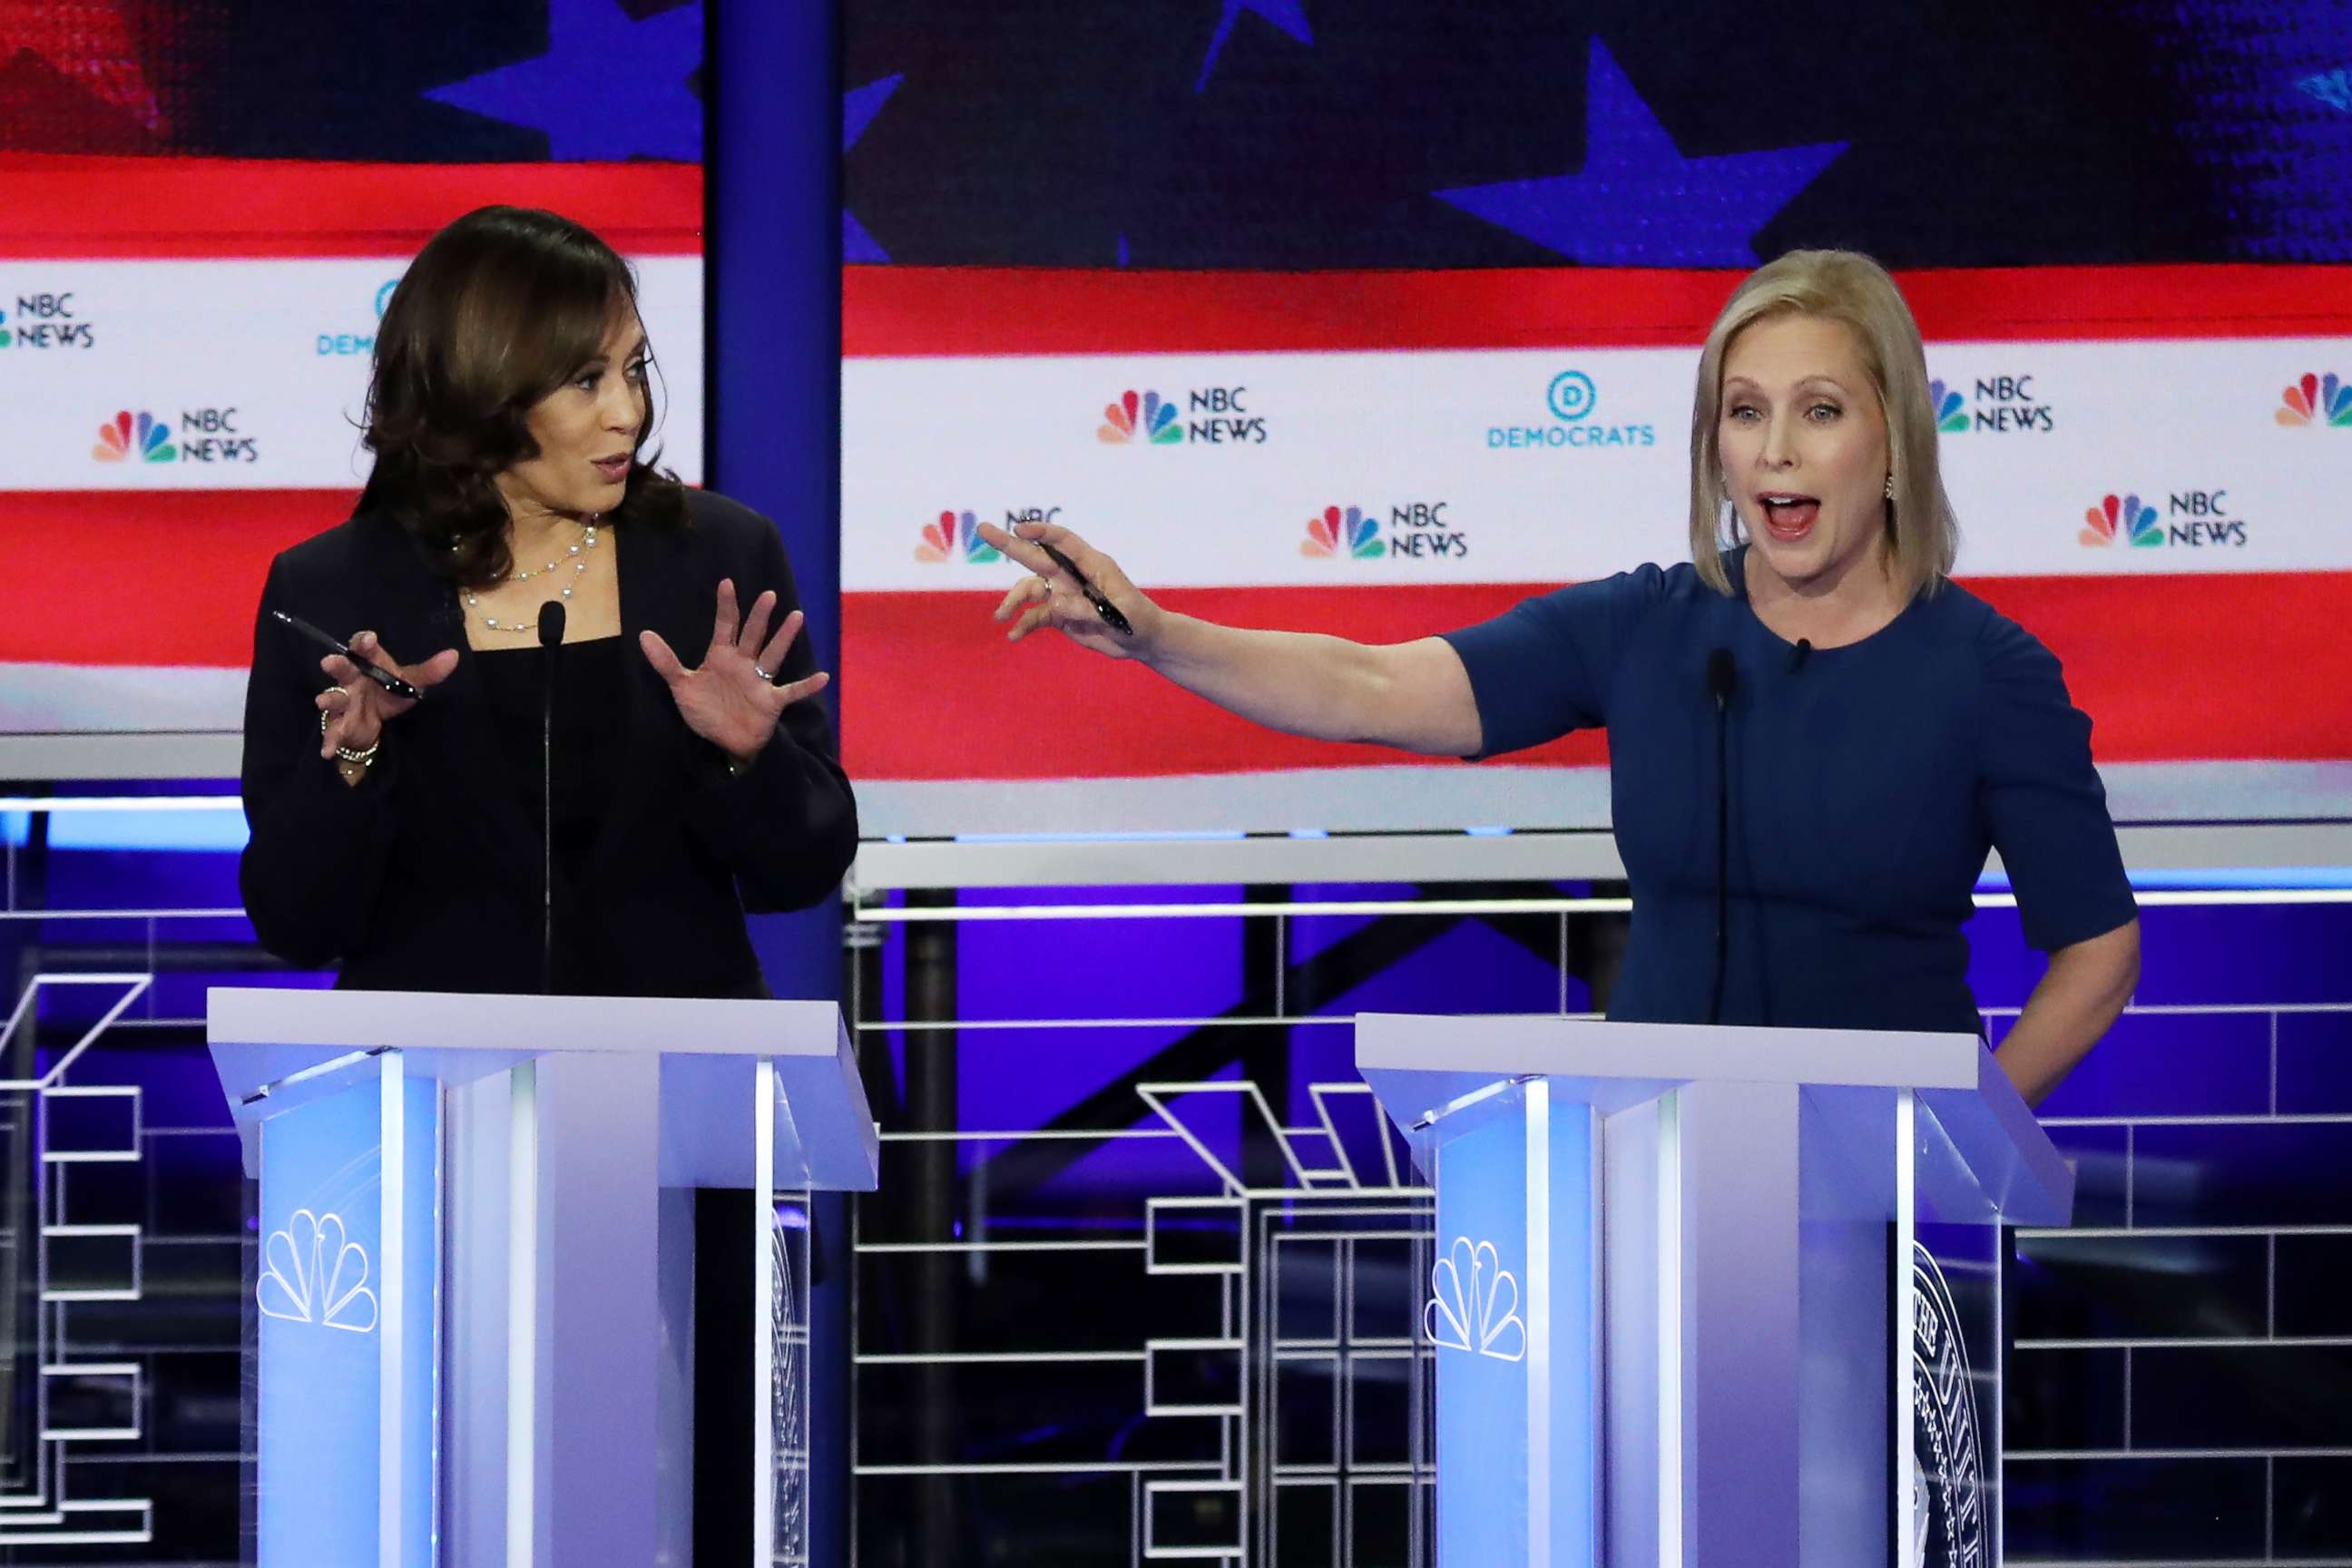 PHOTO: Kamala Harris and Kristen Gillibrand participate in the second night of the first 2020 democratic presidential debate at the Adrienne Arsht Center for the Performing Arts in Miami, June 27, 2019.